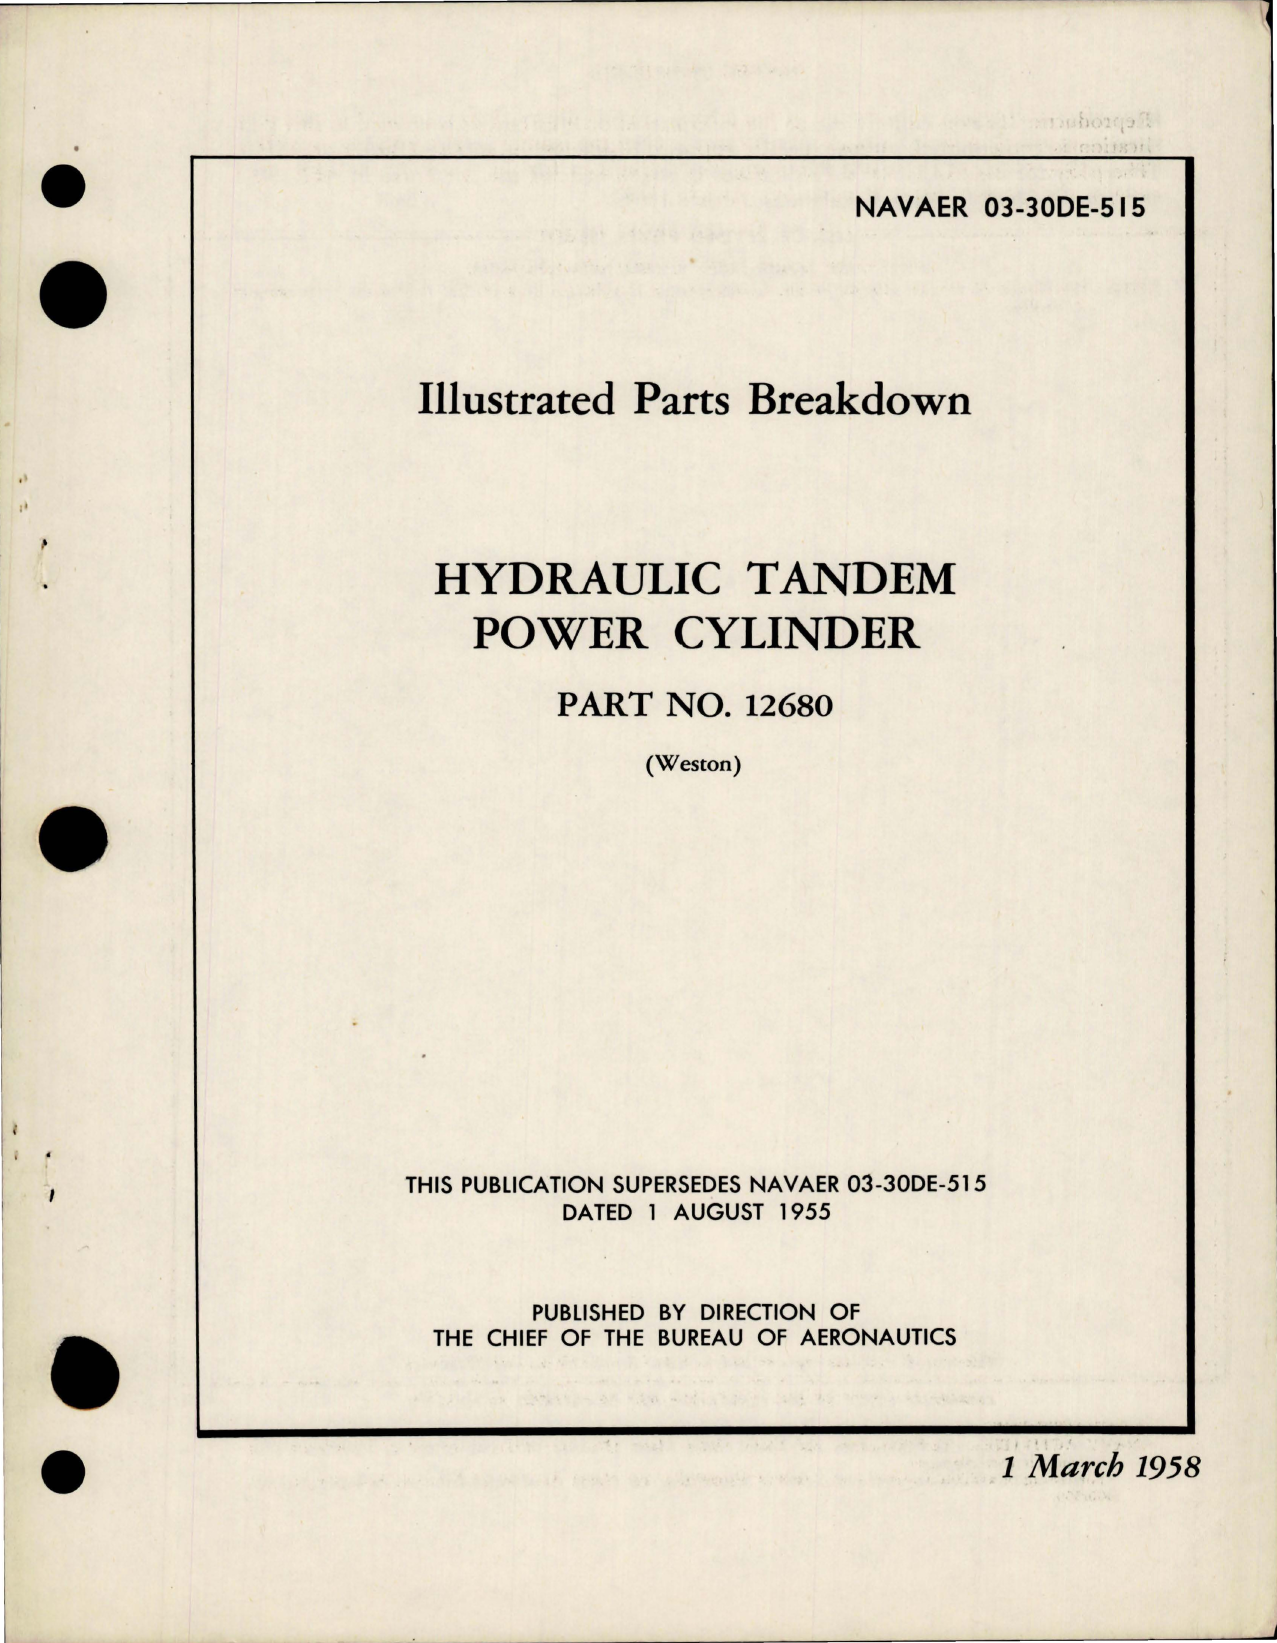 Sample page 1 from AirCorps Library document: Illustrated Parts Breakdown for Hydraulic Tandem Power Cylinder - Part 12680 